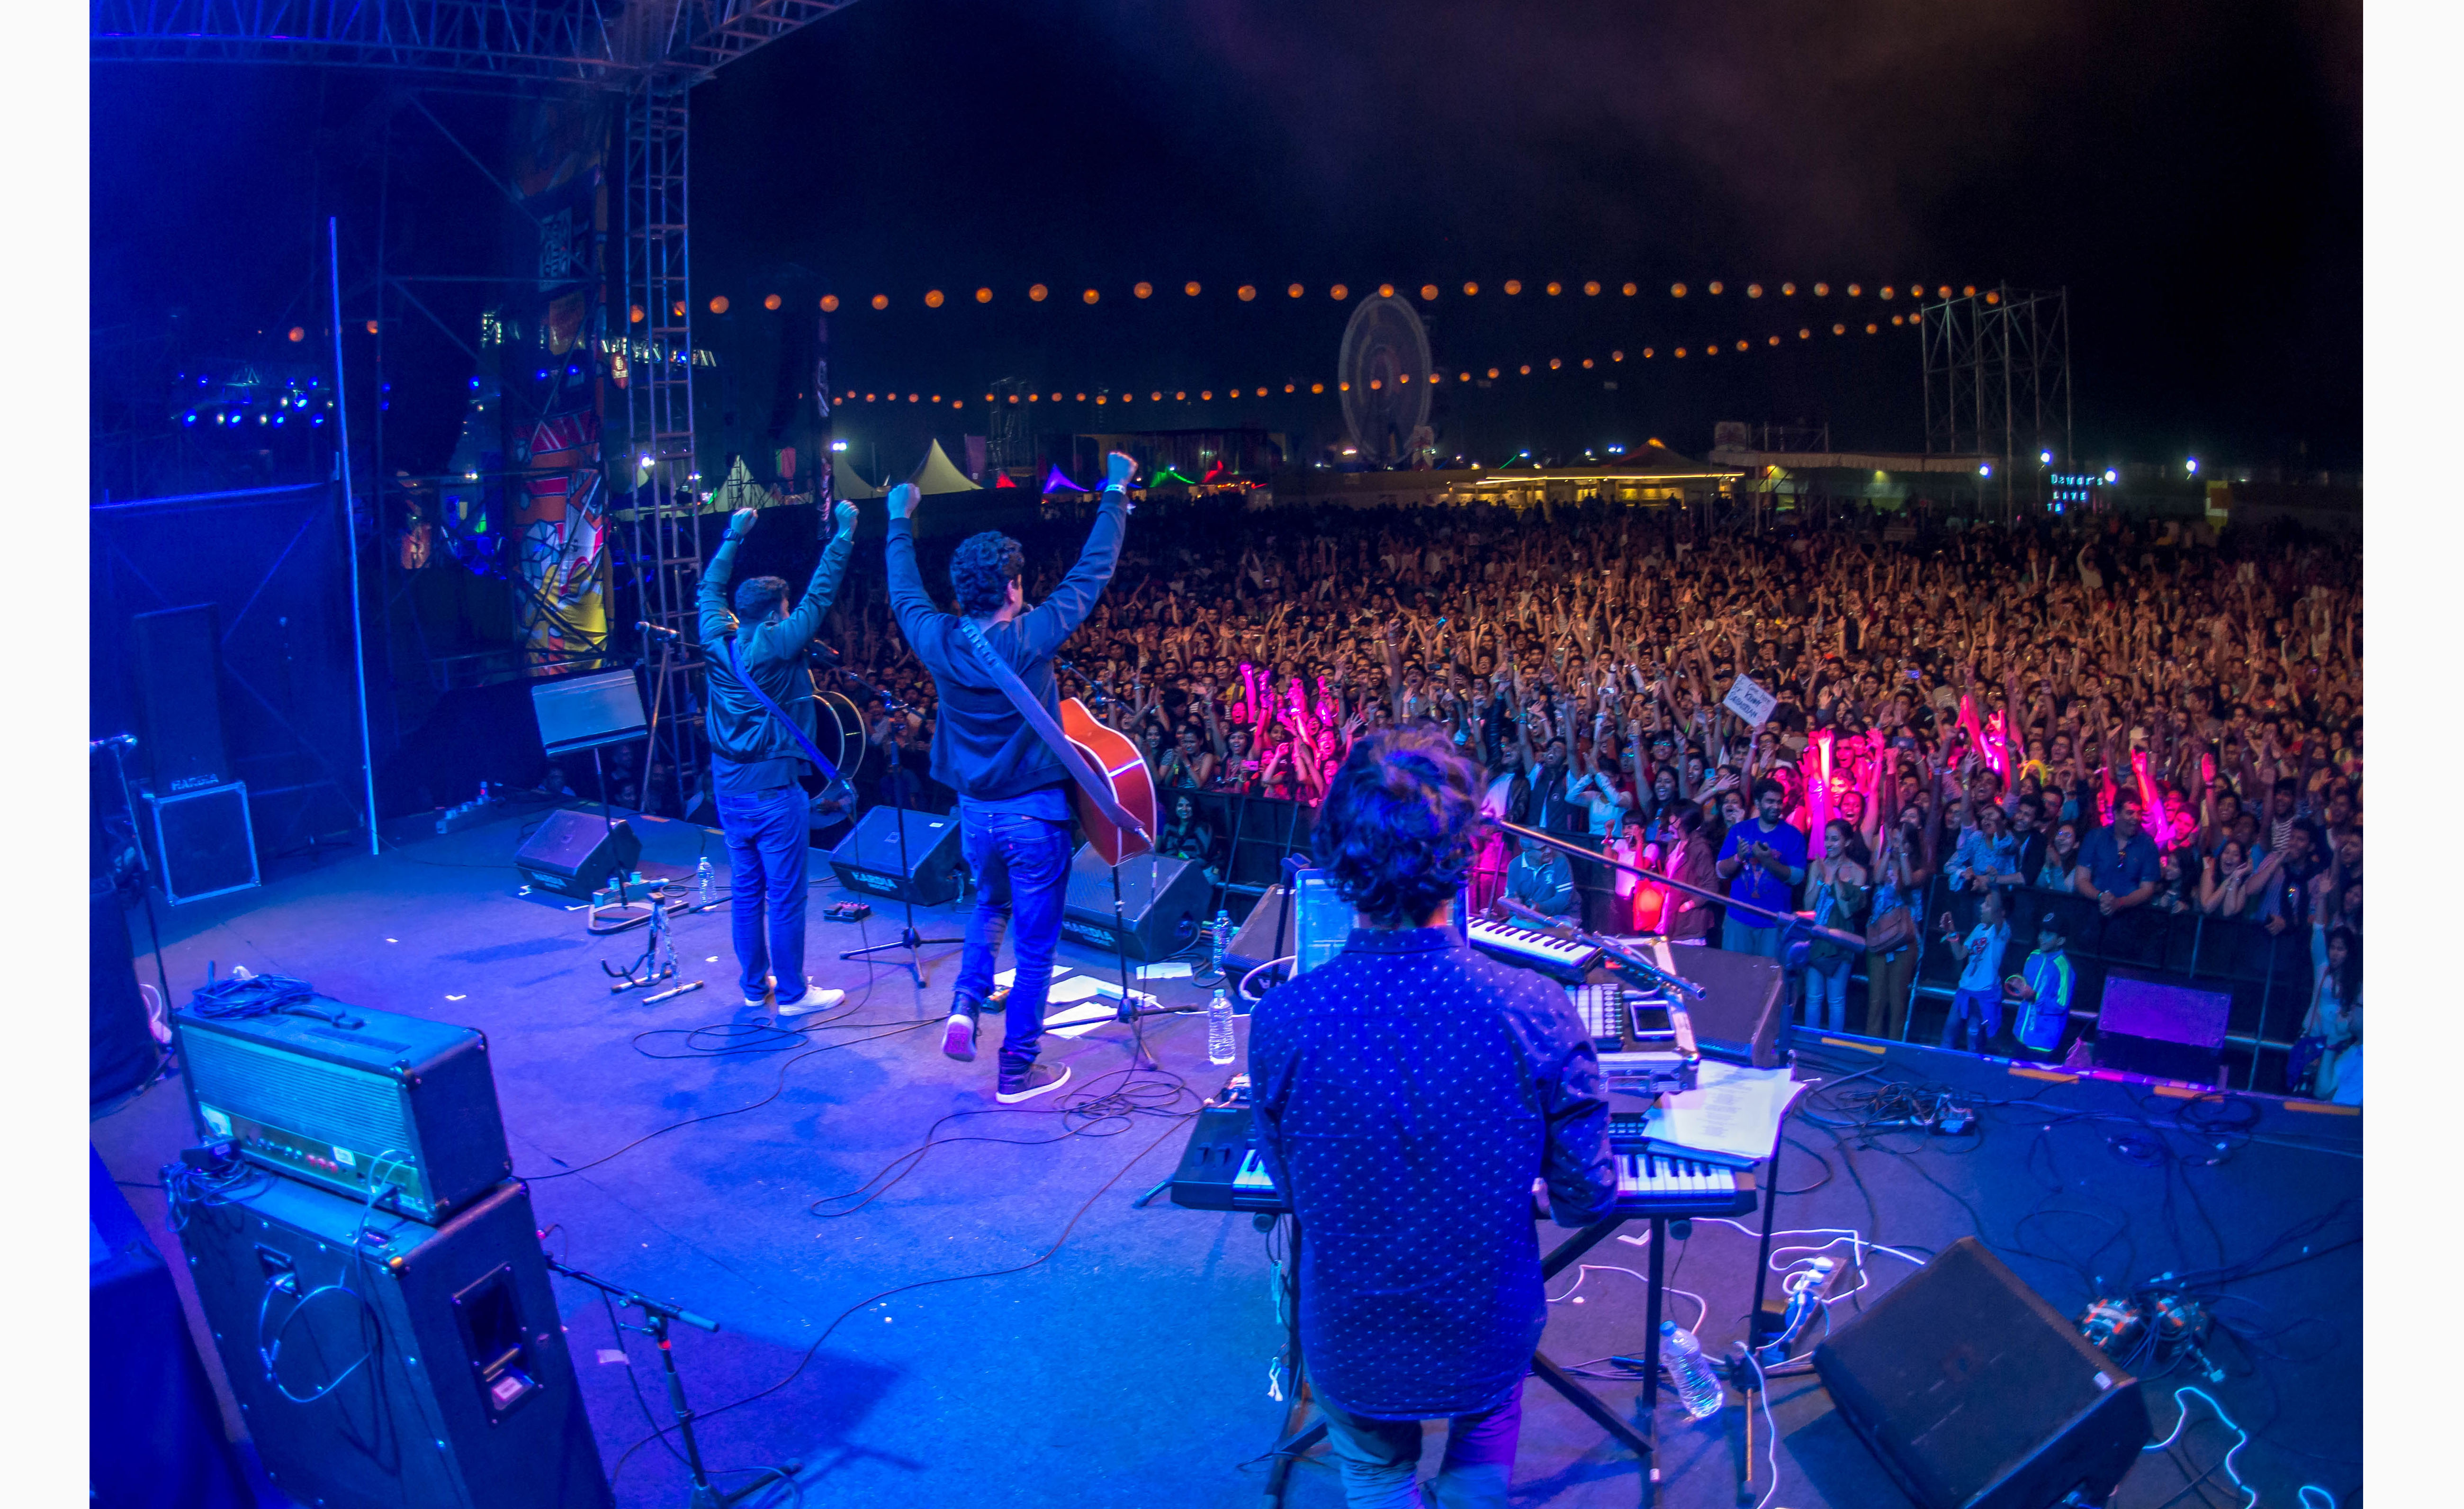 Papon performance on Day 2 of Bacardi NH7 Weekender Pune. Photo Credit - Clique Photography